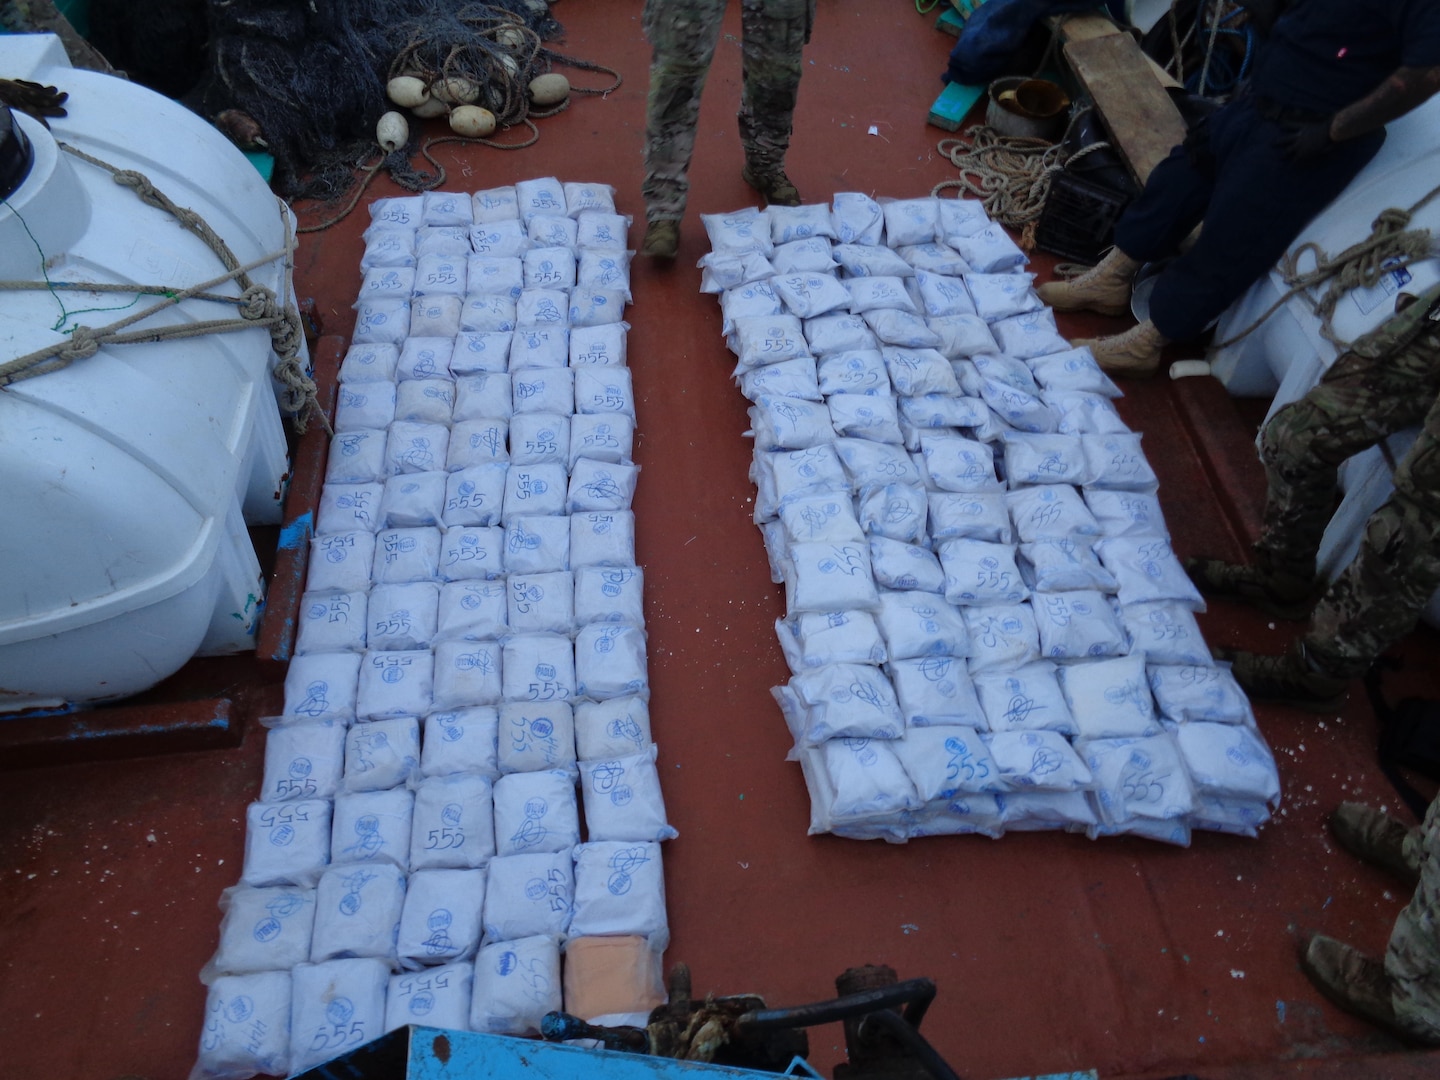 U.S. service members from coastal patrol ship USS Tempest (PC 2) and USS Typhoon (PC 5) inventory an illicit shipment of drugs while aboard a stateless dhow transiting international waters in the Arabian Sea, Dec. 27. (U.S. Navy photo)